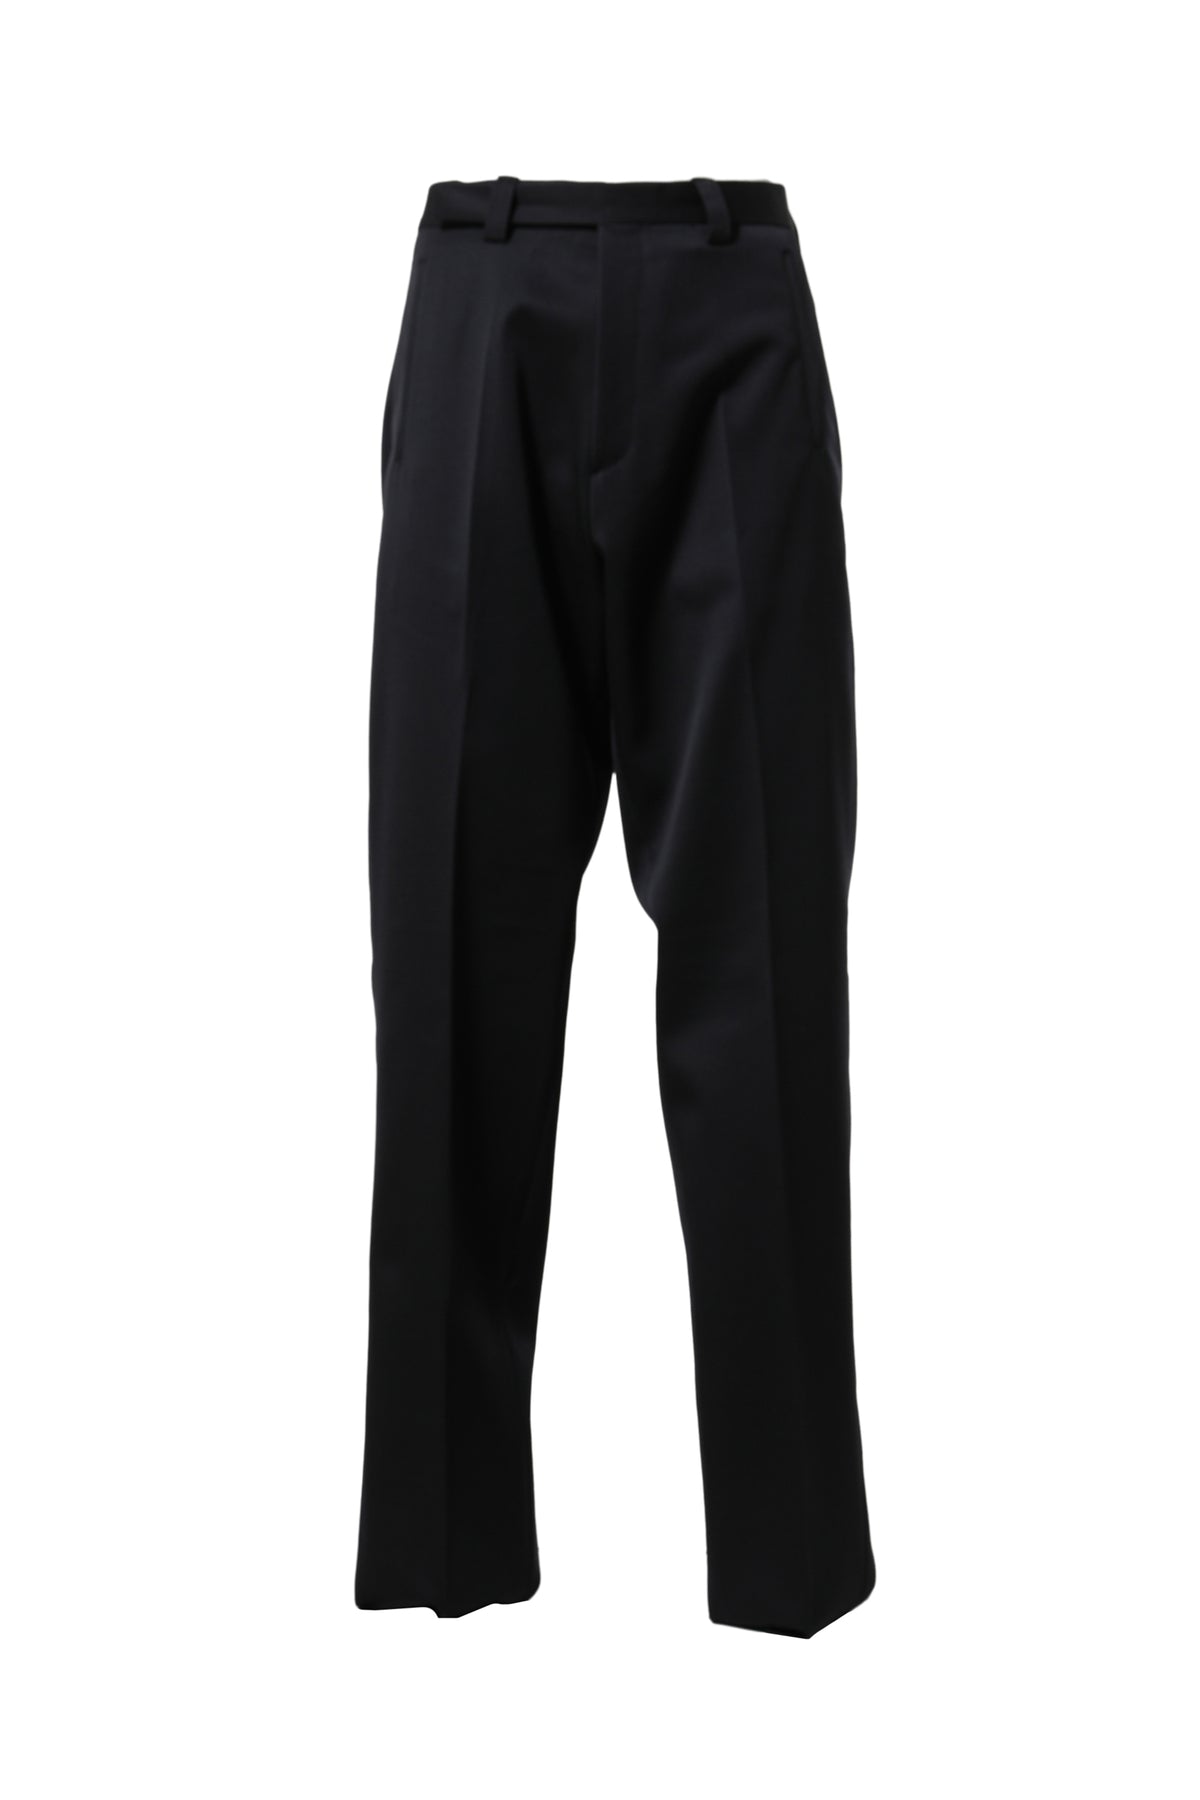 1989 RELAXED SUIT PANTS / BLK